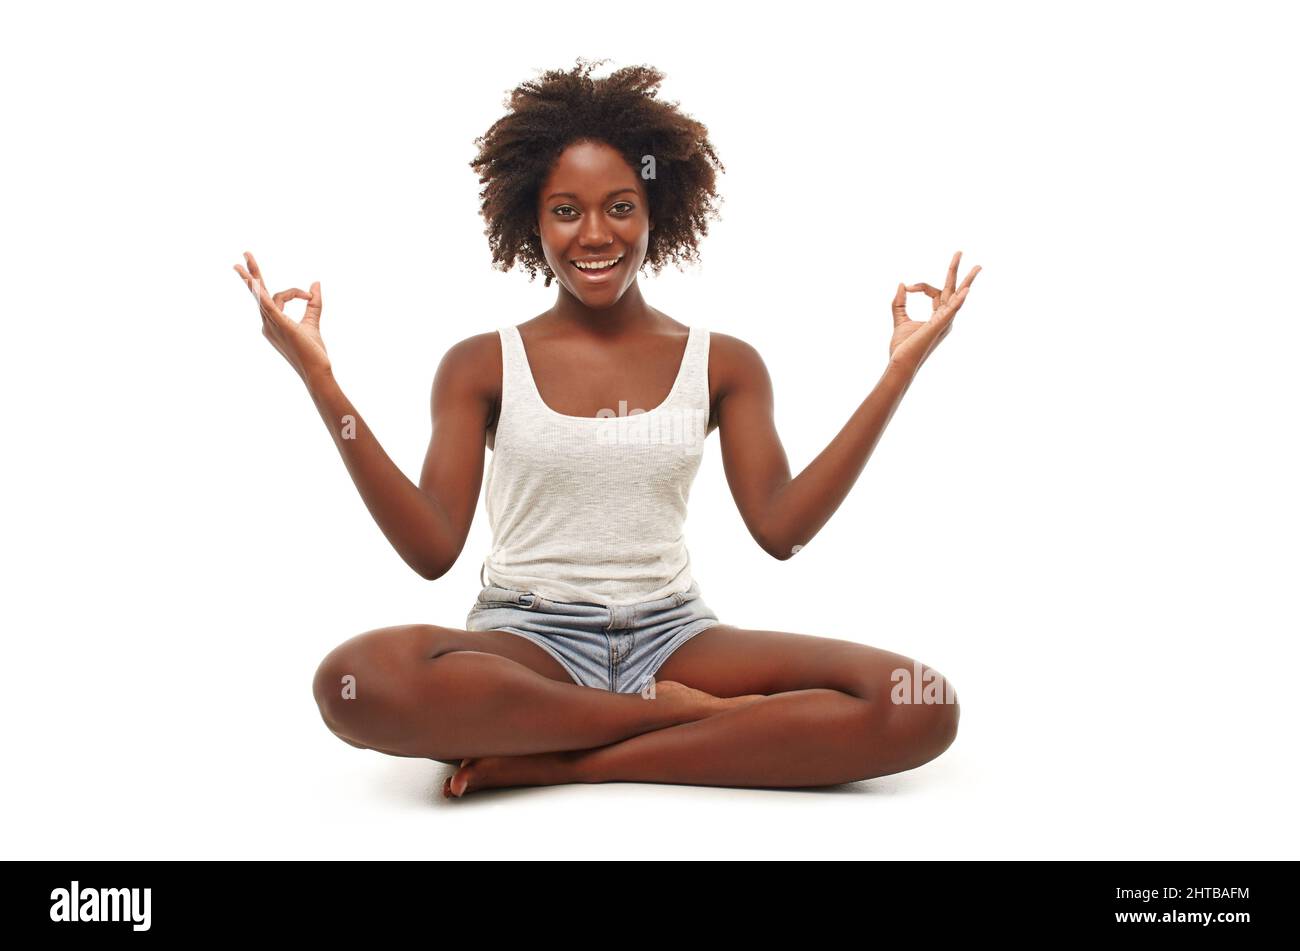 For body and mind. A young woman in a yoga position. Stock Photo